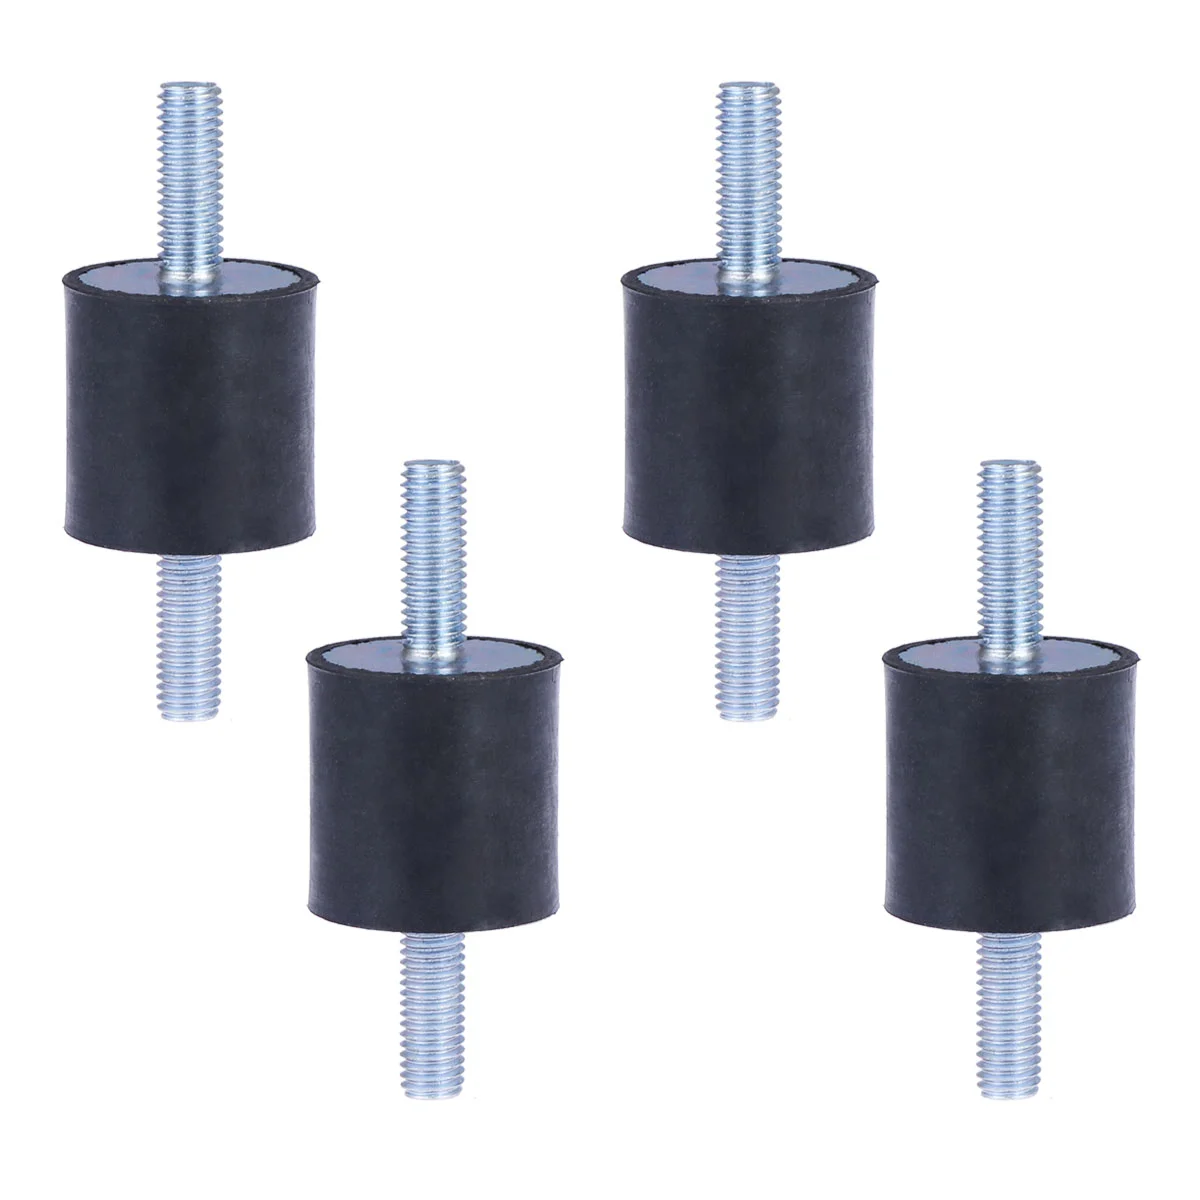 

4PCS Rubber Absorber Vibration Isolator Mounts for Air Conditioner ( Black )